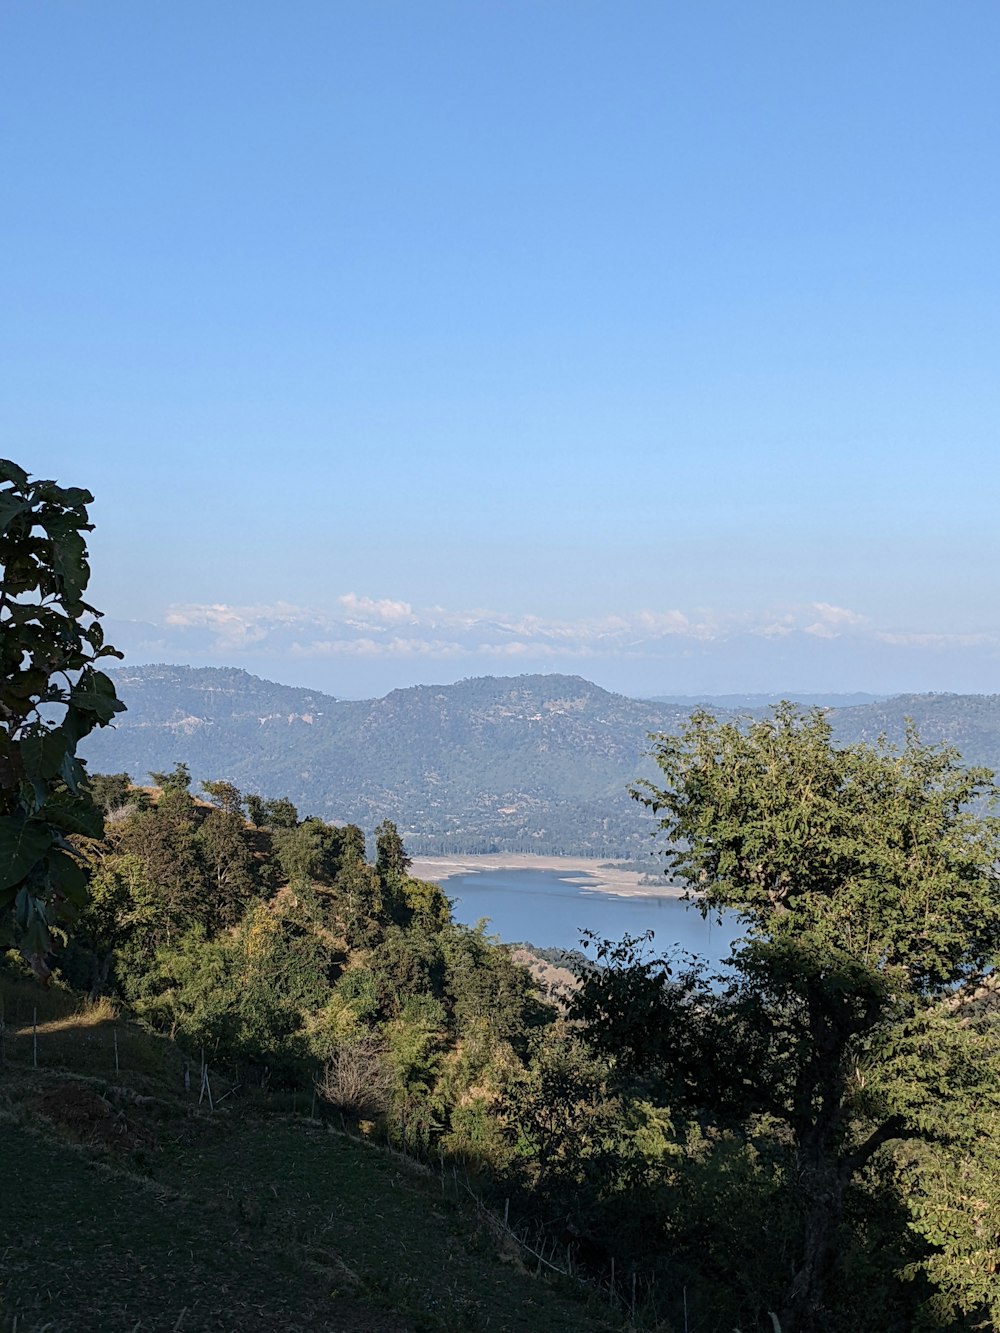 a view of a lake and mountains from a hill